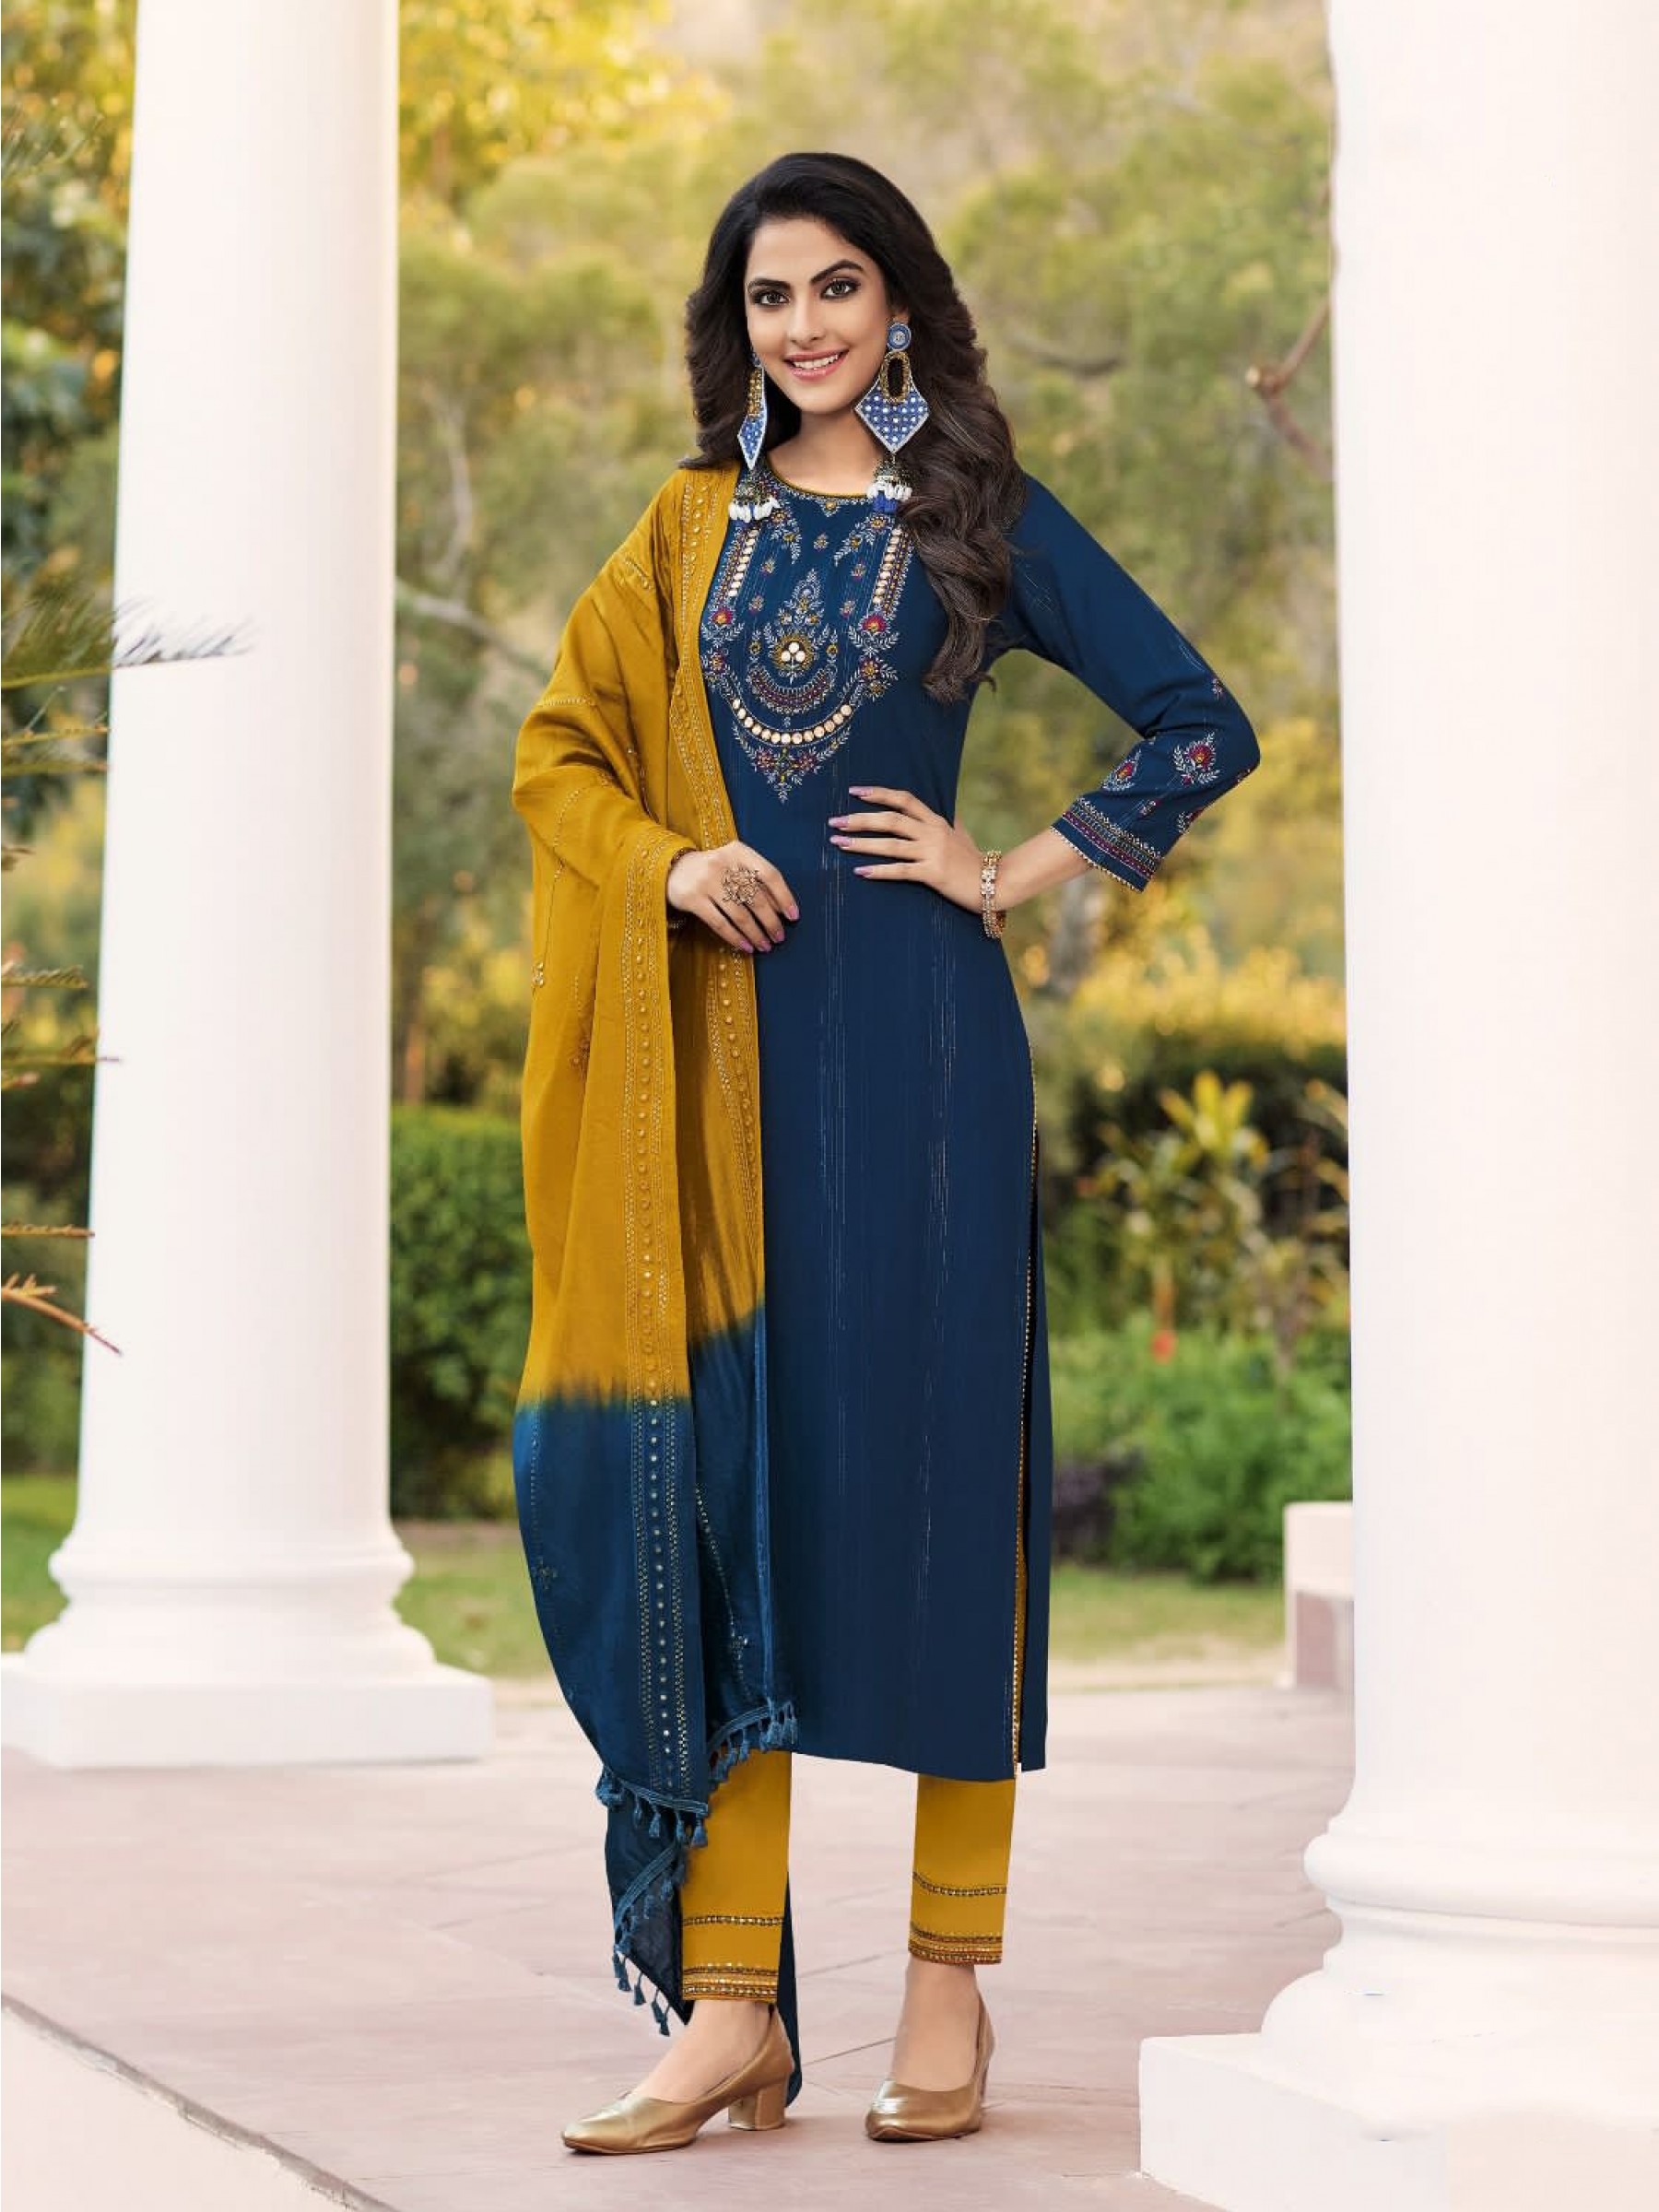 Pure Rayon Viscose Lurex Casual Wear Suit in Teal Blue & Yellow  Color With Embroidery Work